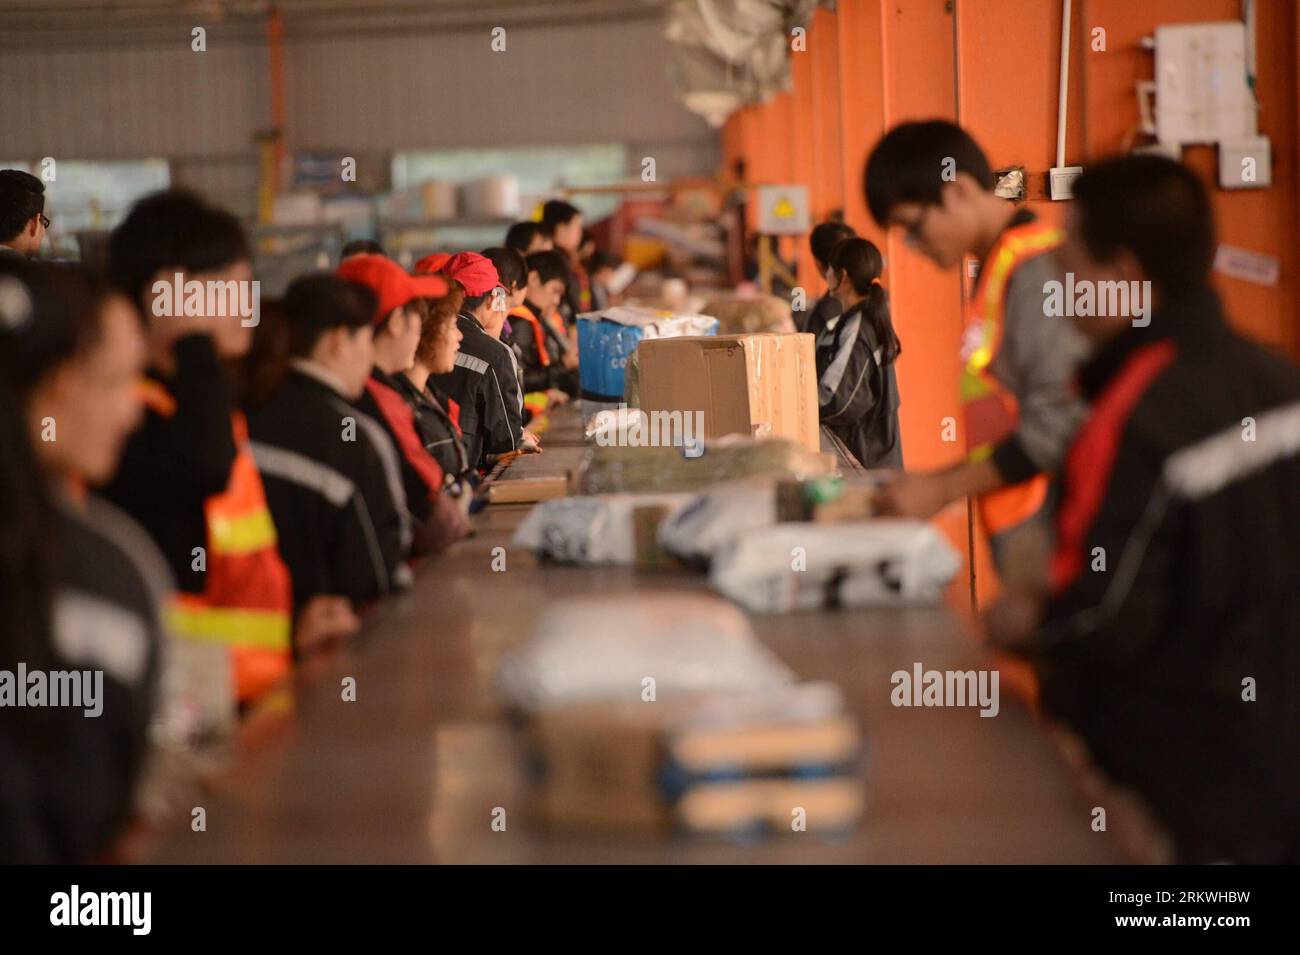 Bildnummer: 58691494  Datum: 12.11.2012  Copyright: imago/Xinhua (121112) -- NANCHANG, Nov. 12, 2012 (Xinhua) -- Workers deal with packages at an express delivery company s sorting center in Nanchang, capital of east China s Jiangxi Province, Nov. 12, 2012. The Chinese grassroots self-proclaimed Singles Day, which falls on November 11, has become a shopping festival under a continuous sales promotion of e-business groups. Great discounts resulted in a sharp increase of online trades which cause enormous pressure on express service.(Xinhua/Zhou Mi) (wjq) CHINA-JIANGXI-SINGLE S DAY-EXPRESS DELIV Stock Photo